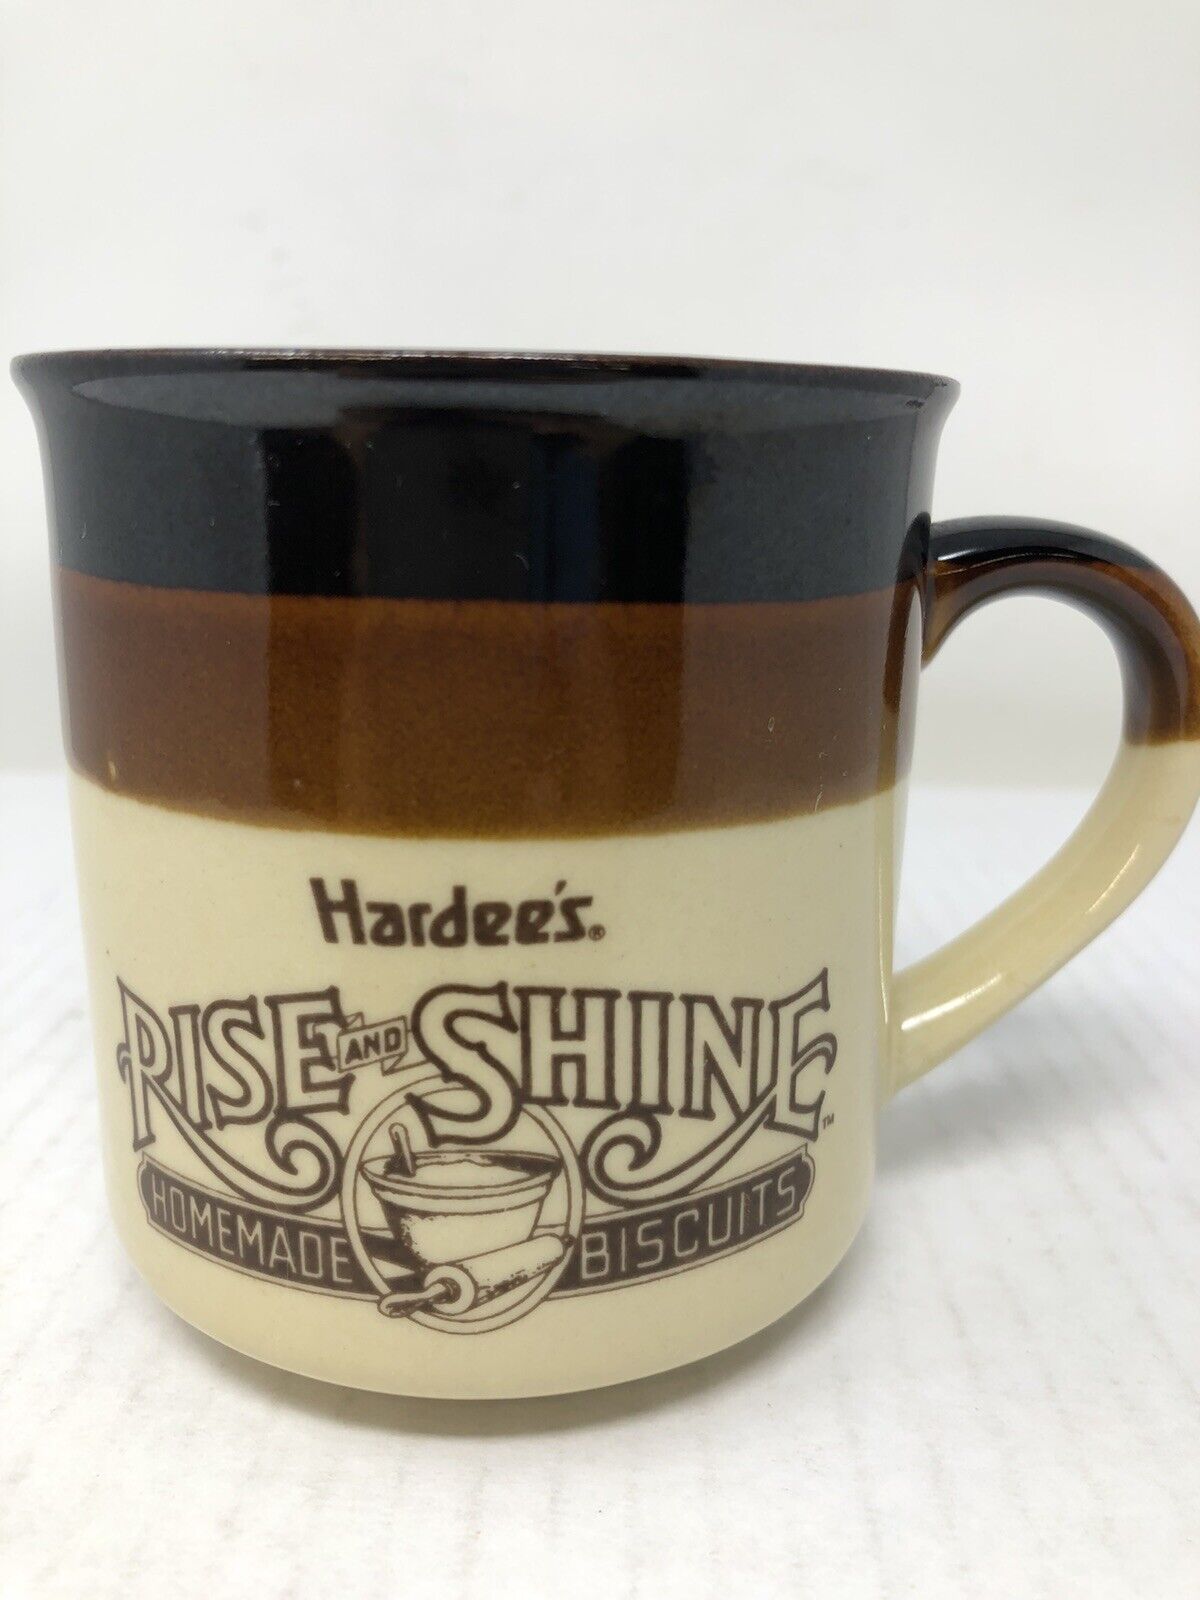 Vintage 1989 Hardee's Food Systems Coffee Mug Rise and Shine Homemade Biscuits